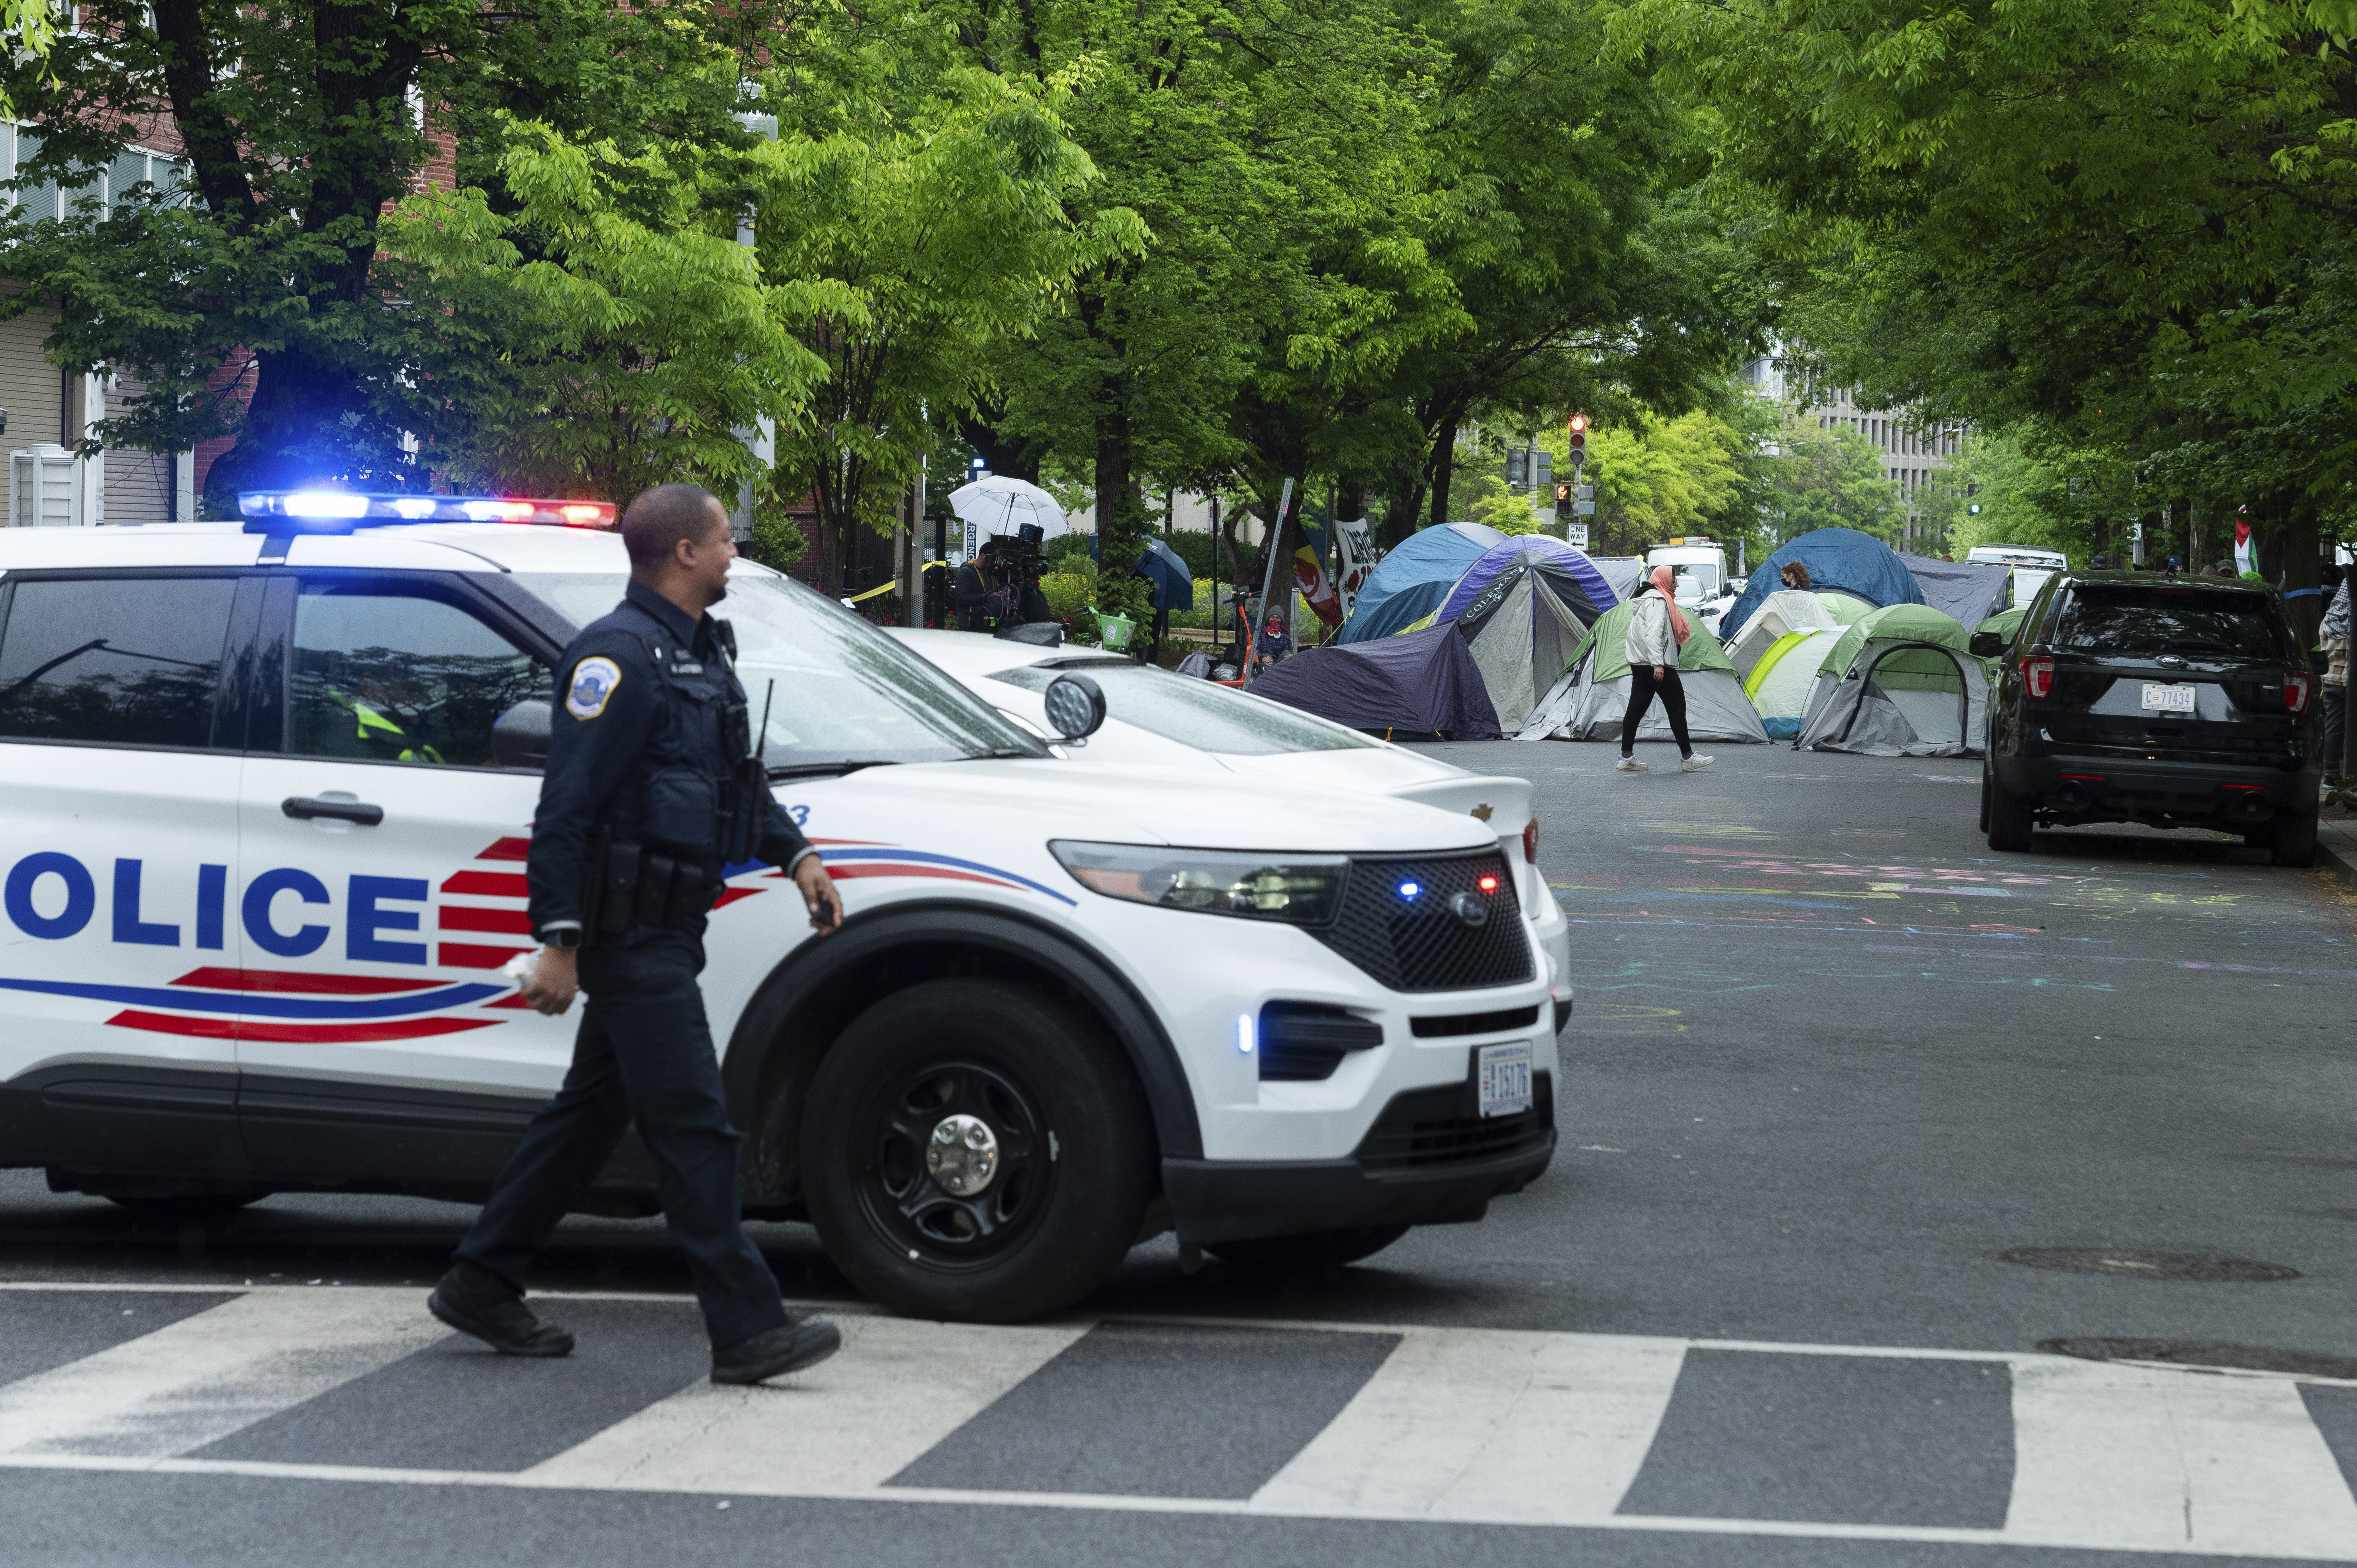 Police close the street near people protesting at the George Washington University in Washington, DC, on April 27.